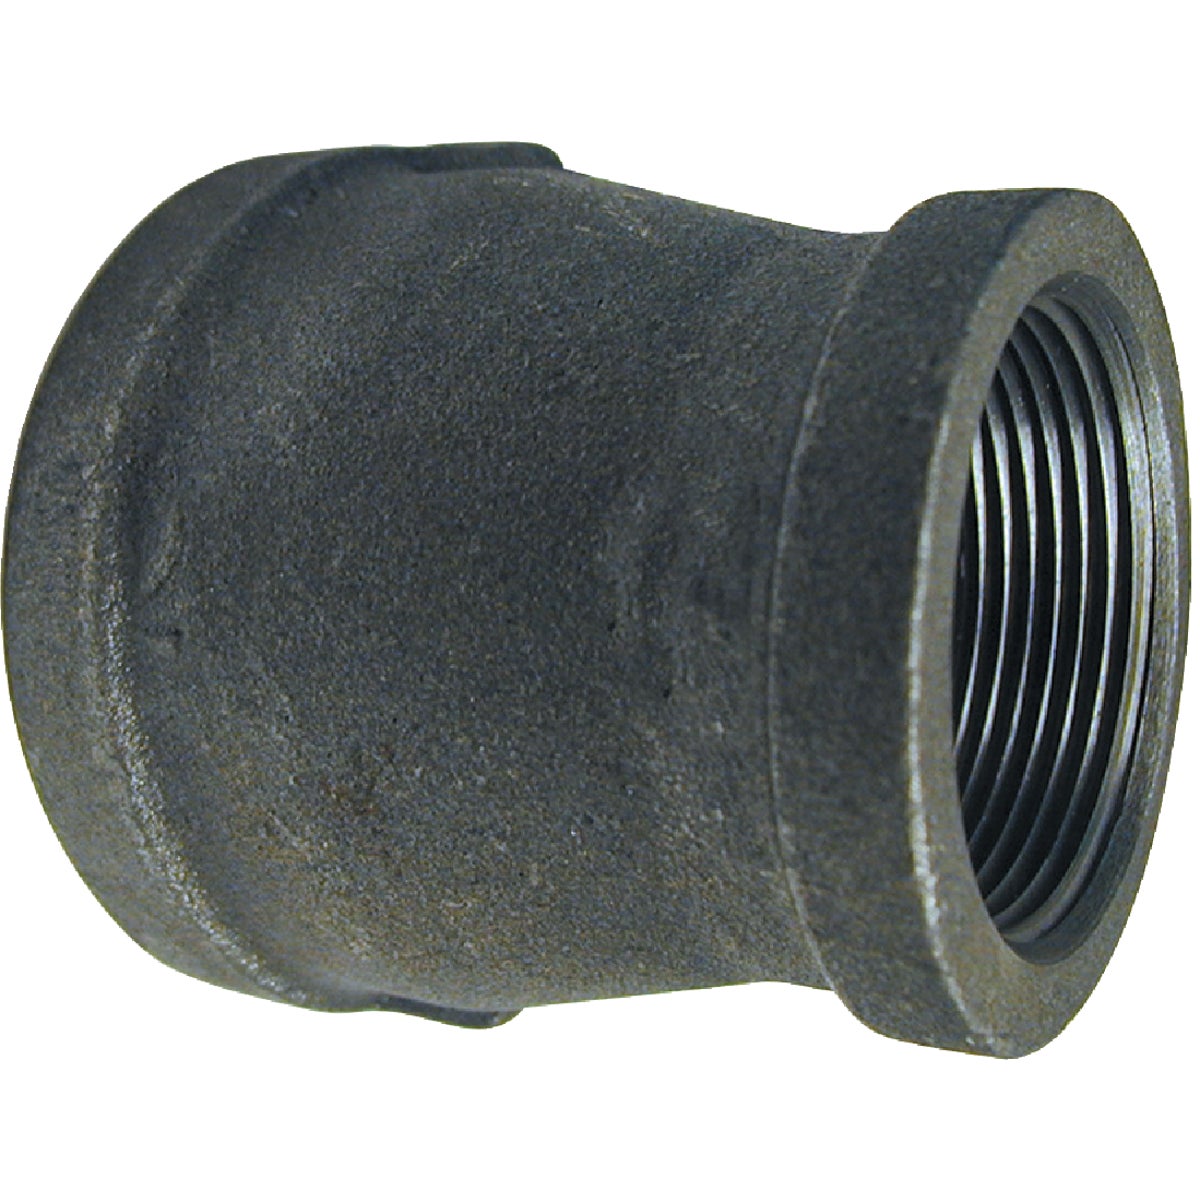 Southland 3/8 In. x 1/8 In. Malleable Black Iron Reducing Coupling